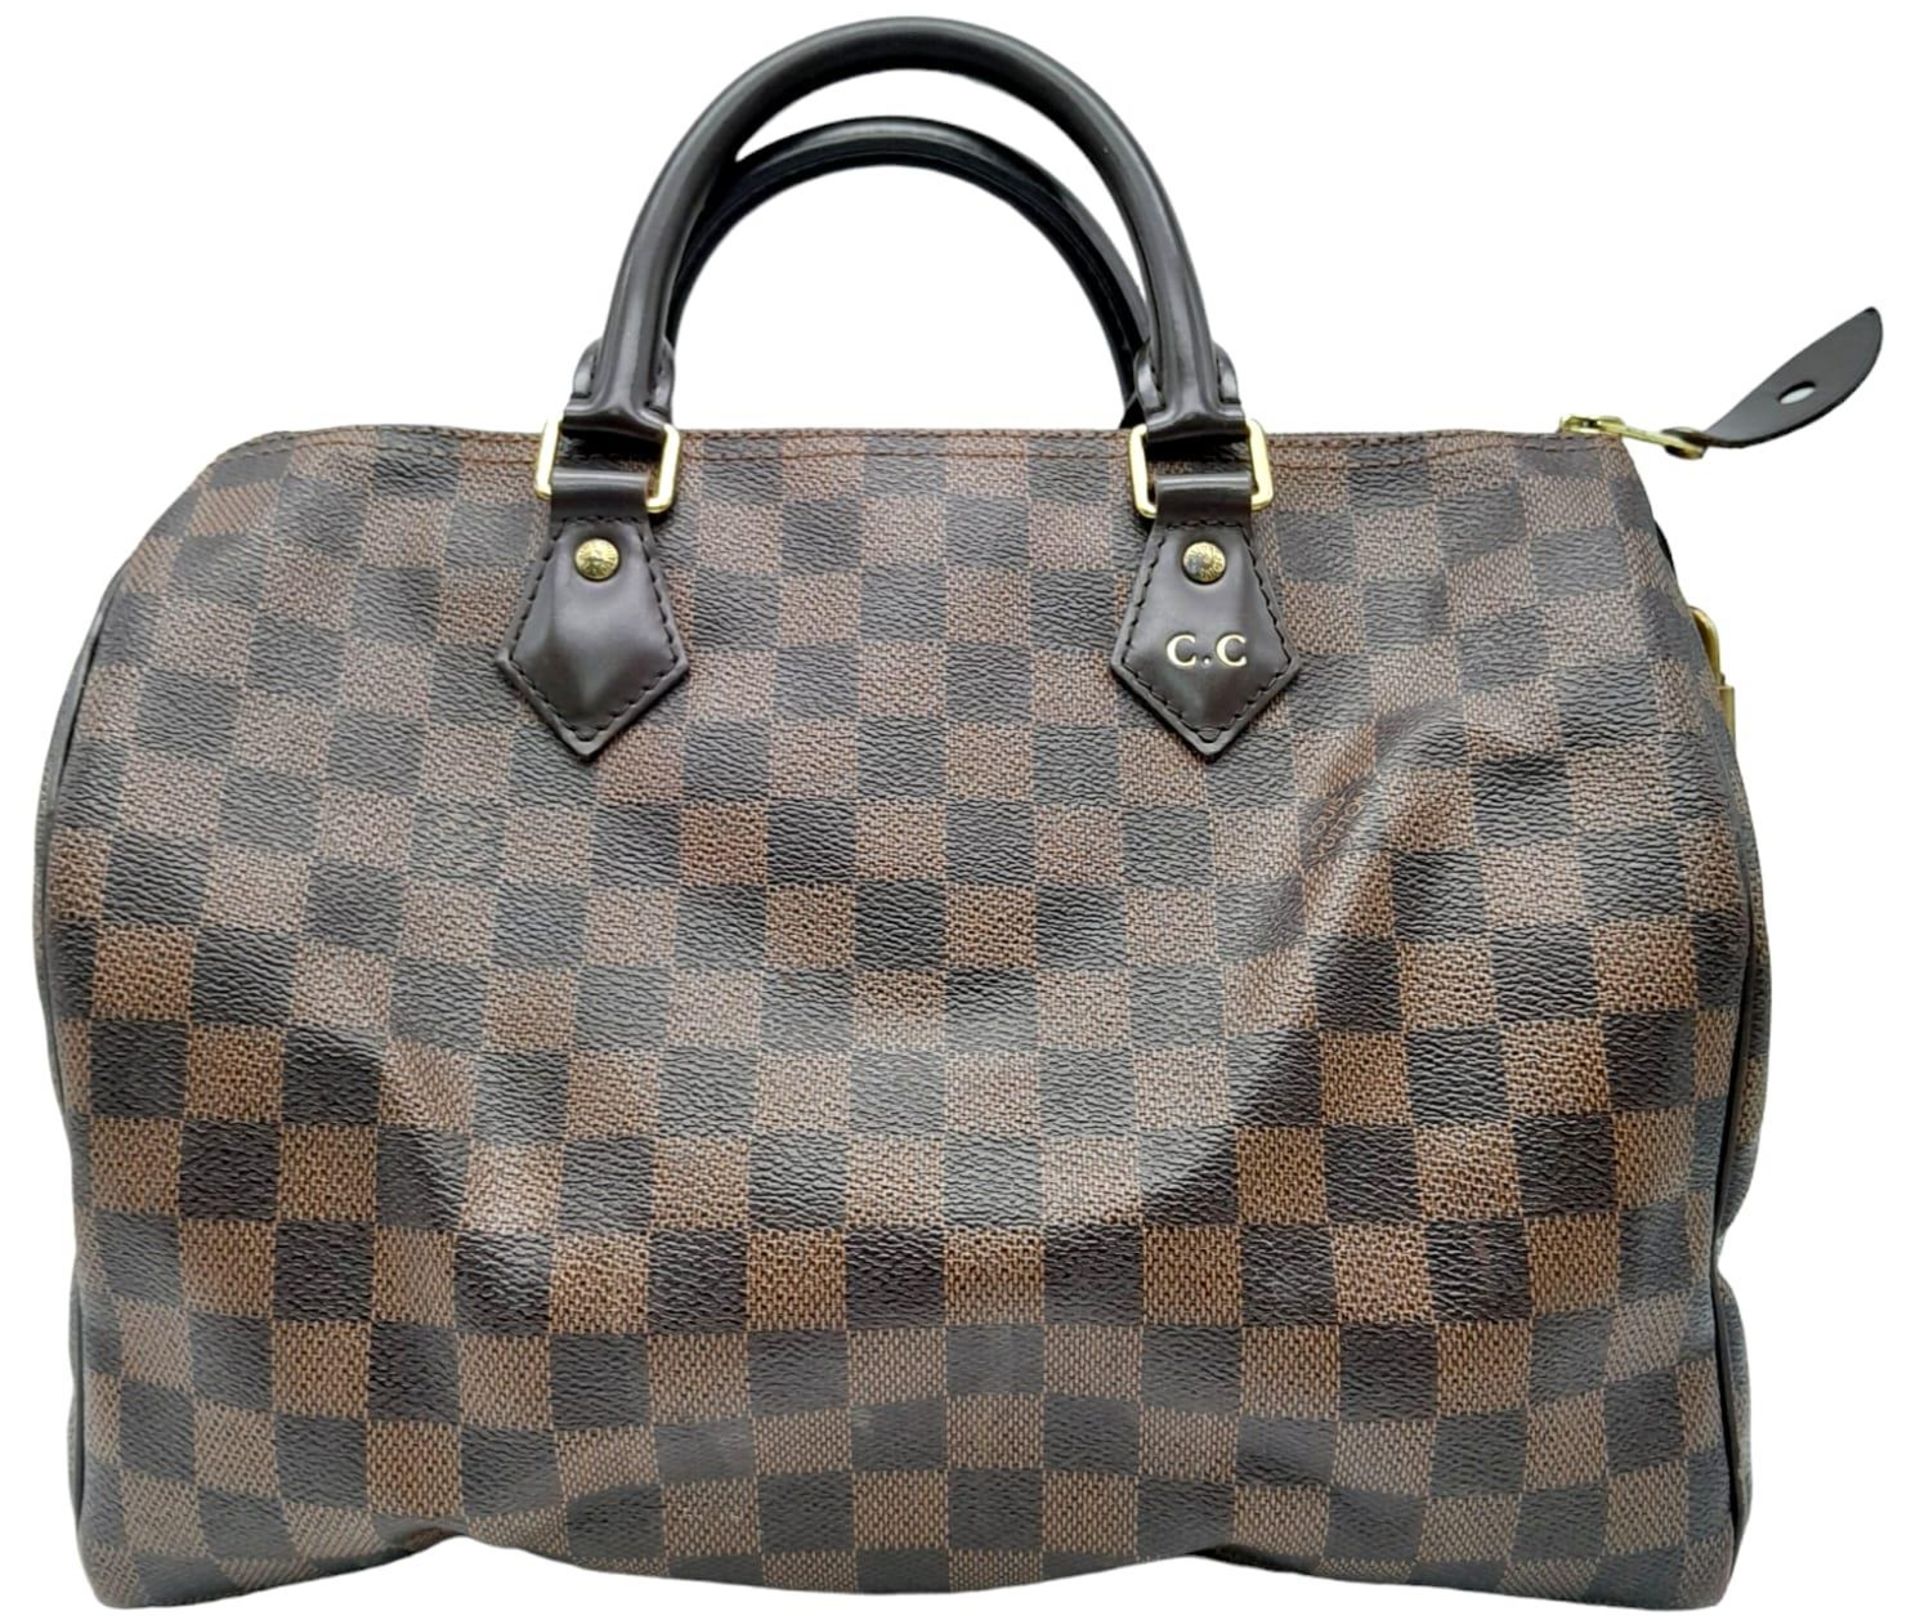 A Louis Vuitton Speedy Bag. Checked LV canvas exterior. Red textile interior. Comes with dust cover,